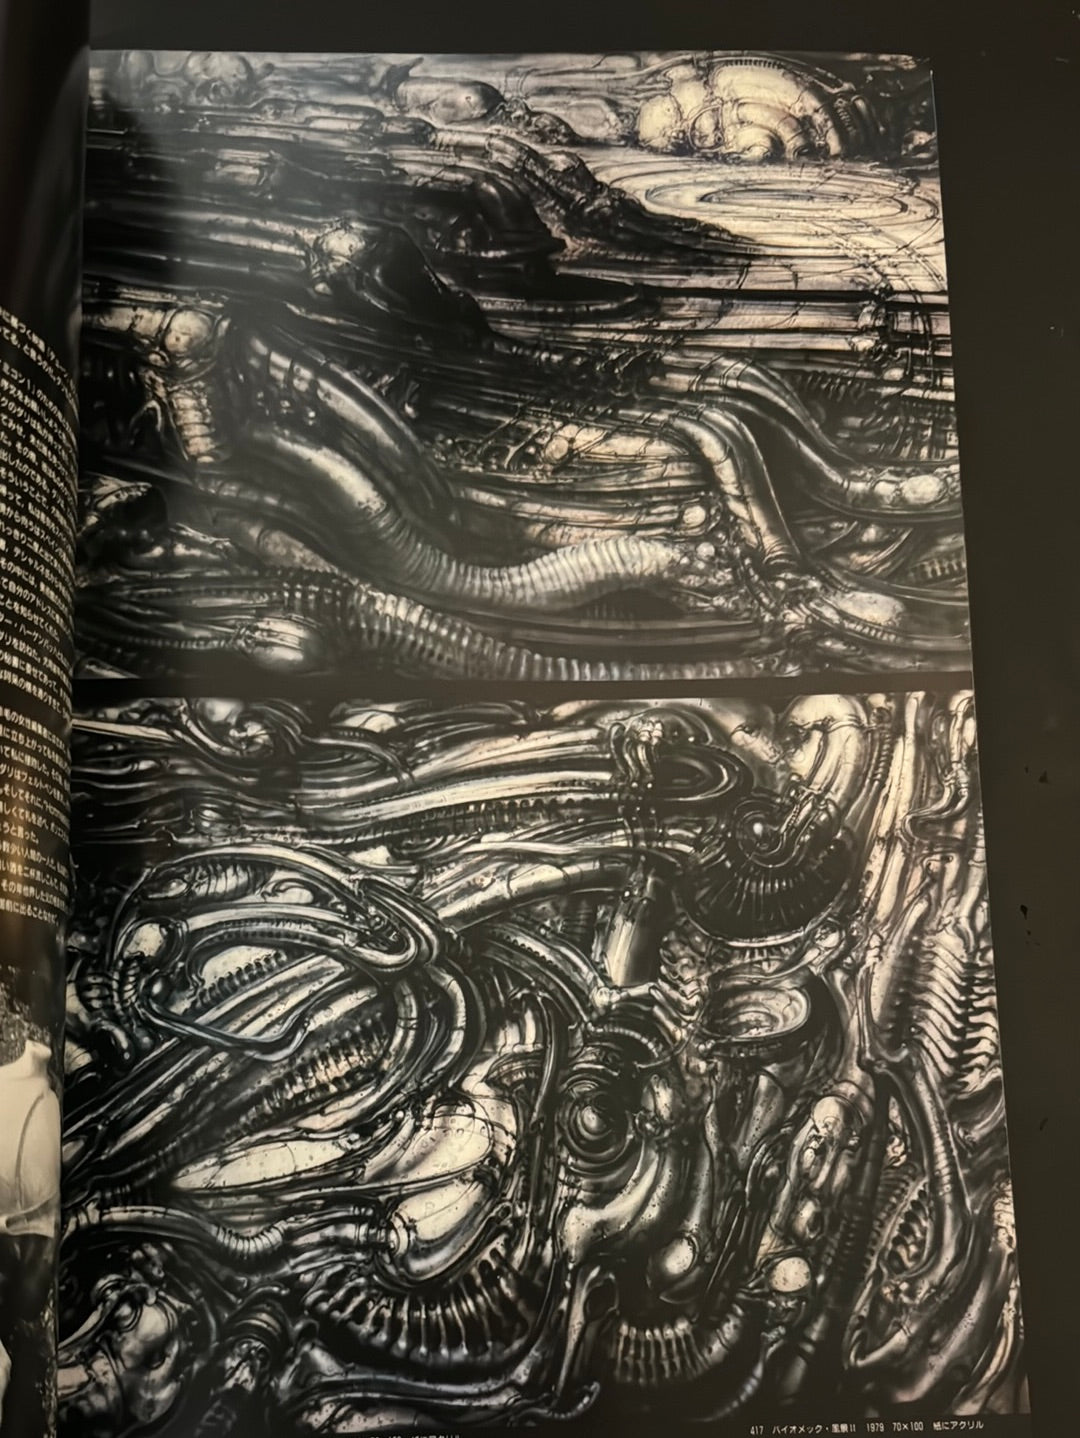 H.R.Giger's Necronomicon 1&2 (Japanese edition)